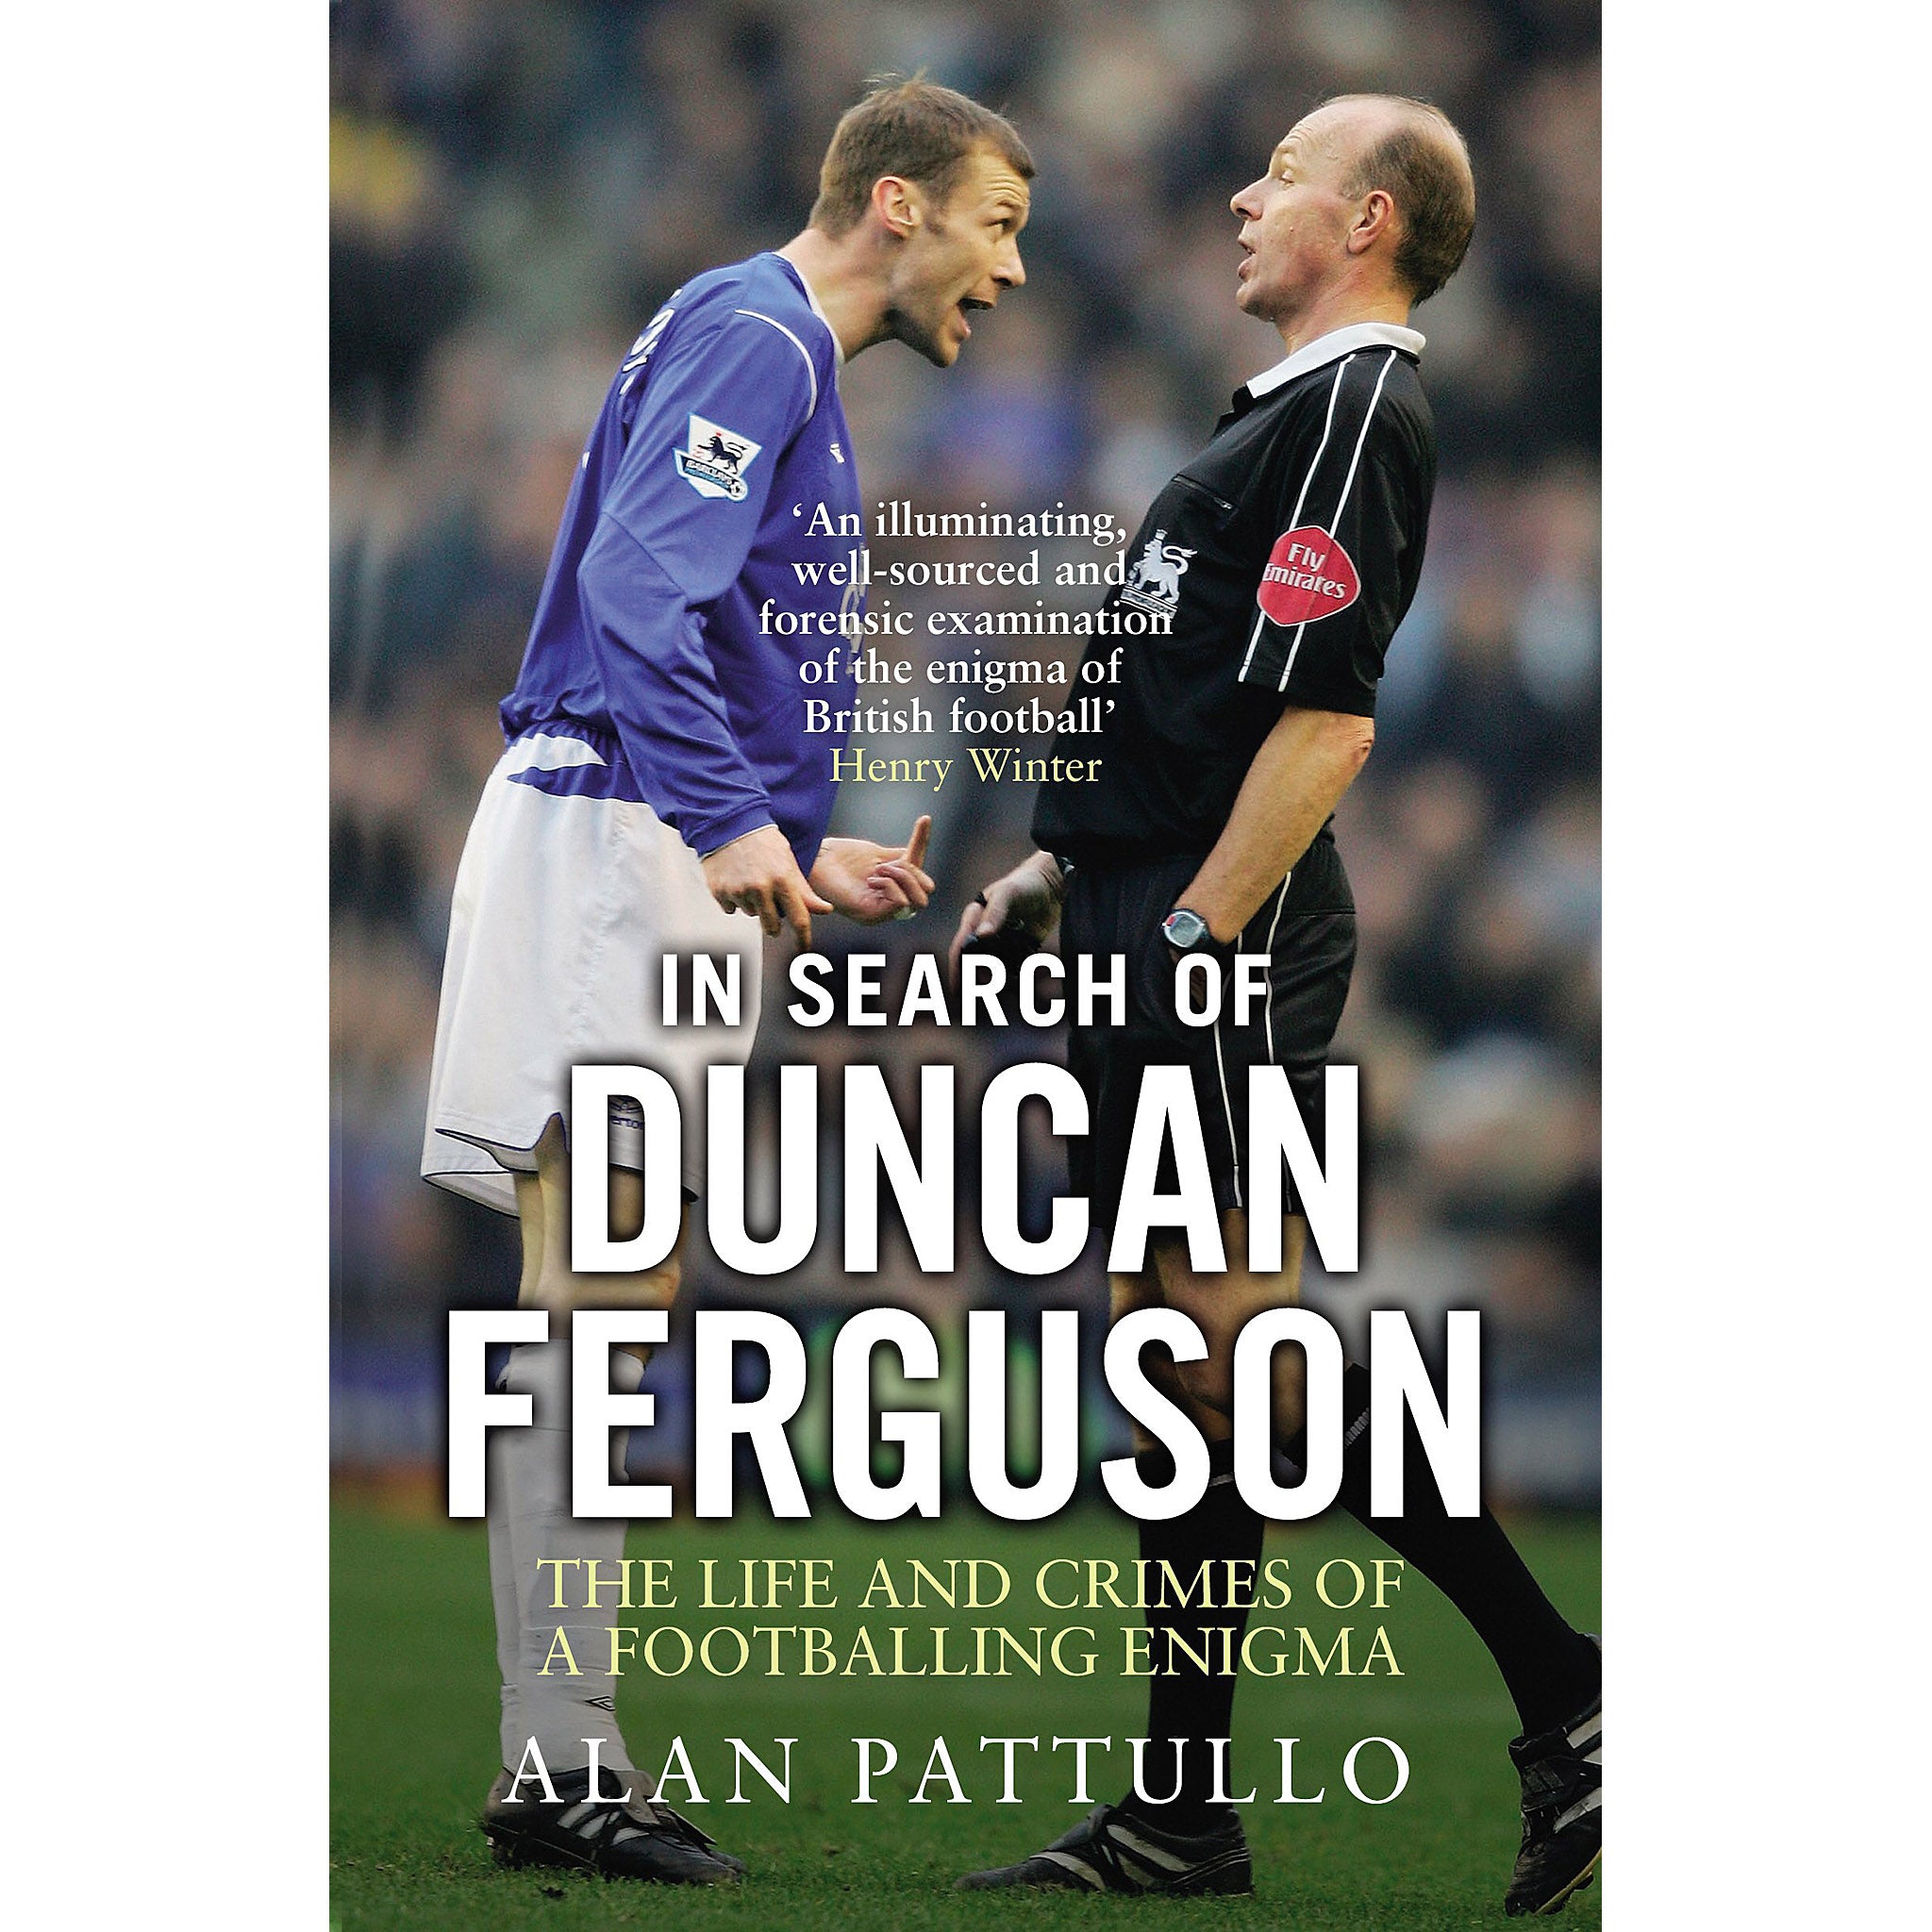 In Search of Duncan Ferguson – The Life and Crimes of a Footballing Enigma